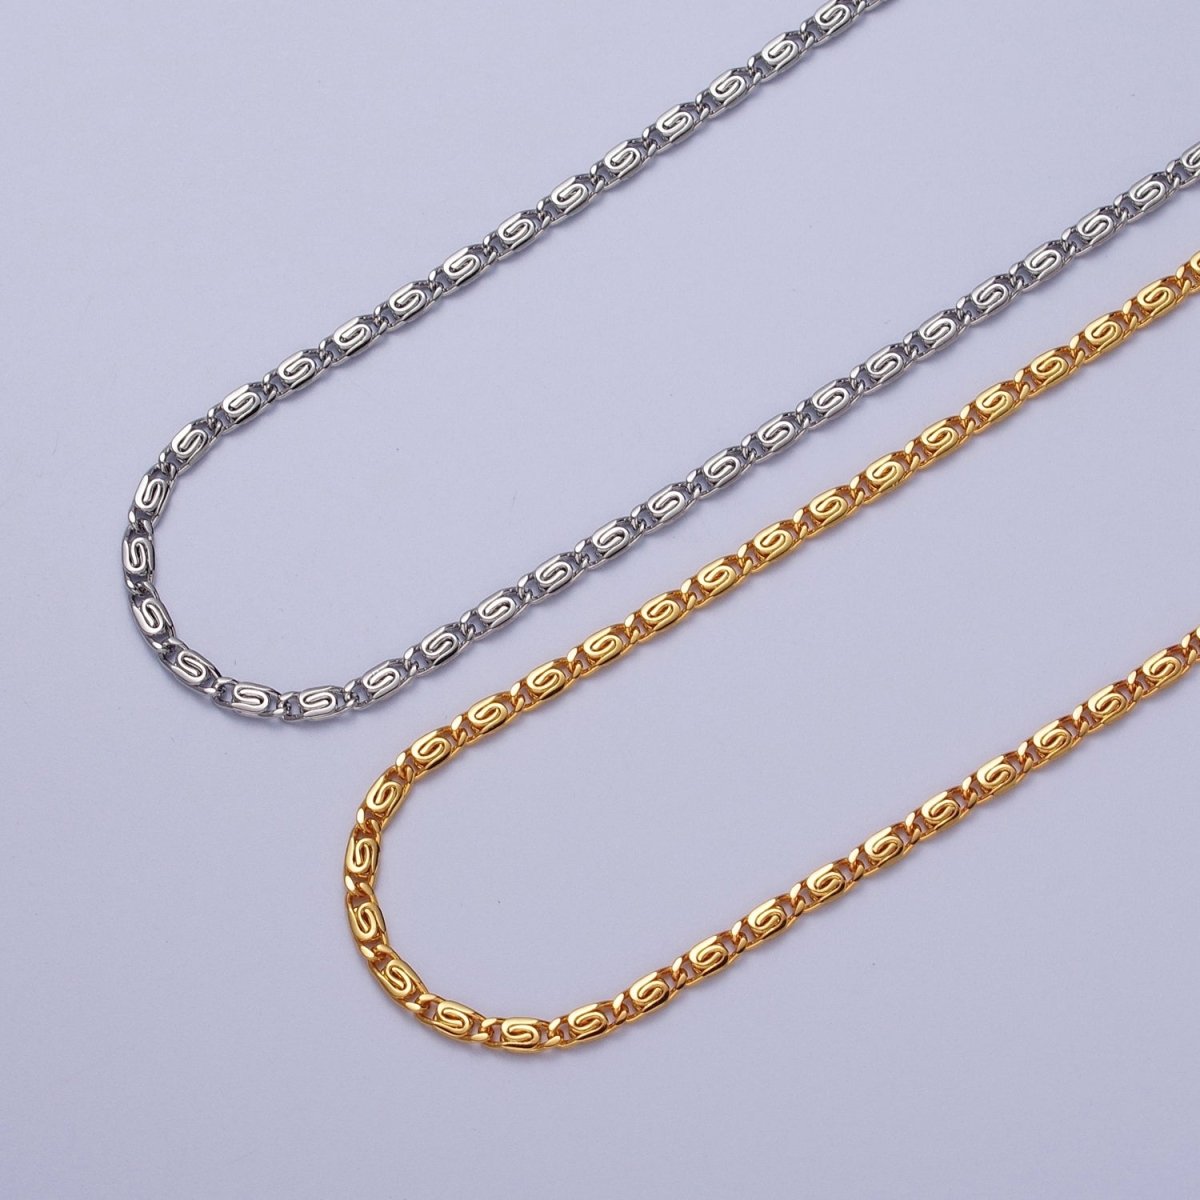 24K Gold Filled 2.5mm Snail Scroll Chain 17.5, 18.5, 19 Inches Necklace in Gold & Silver | WA-1265 - WA-1270 Clearance Pricing - DLUXCA